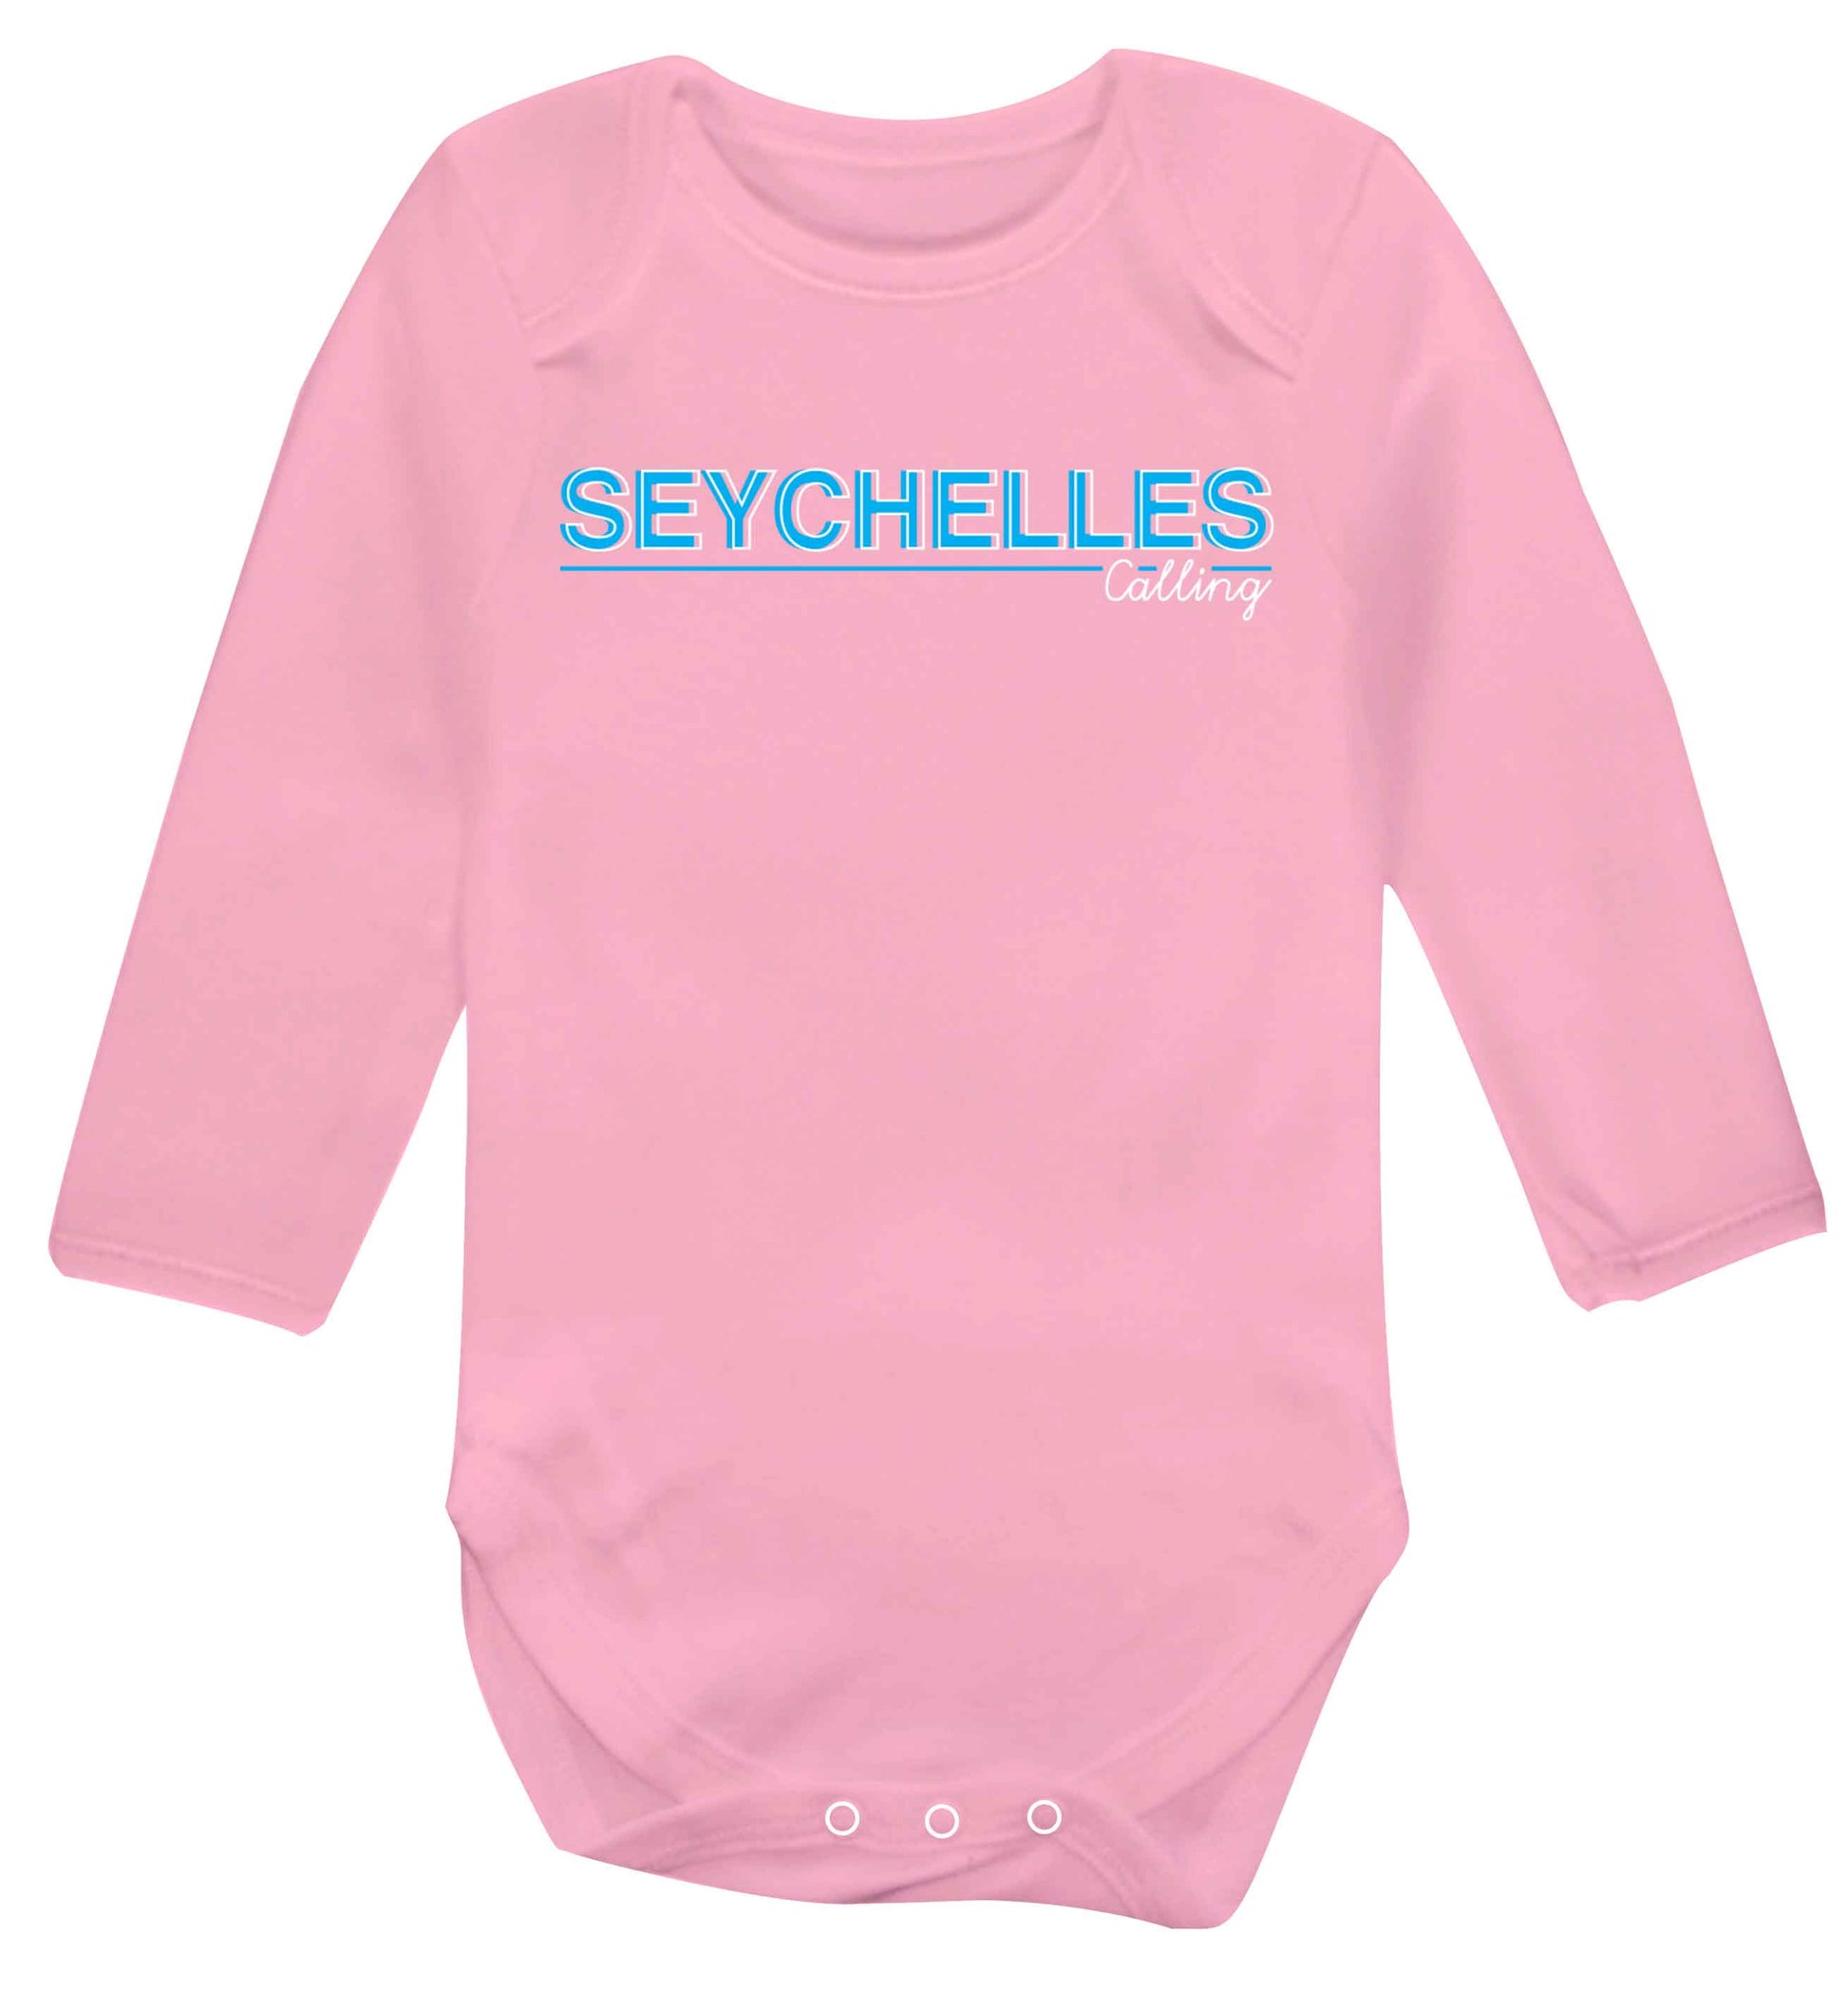 Seychelles calling Baby Vest long sleeved pale pink 6-12 months